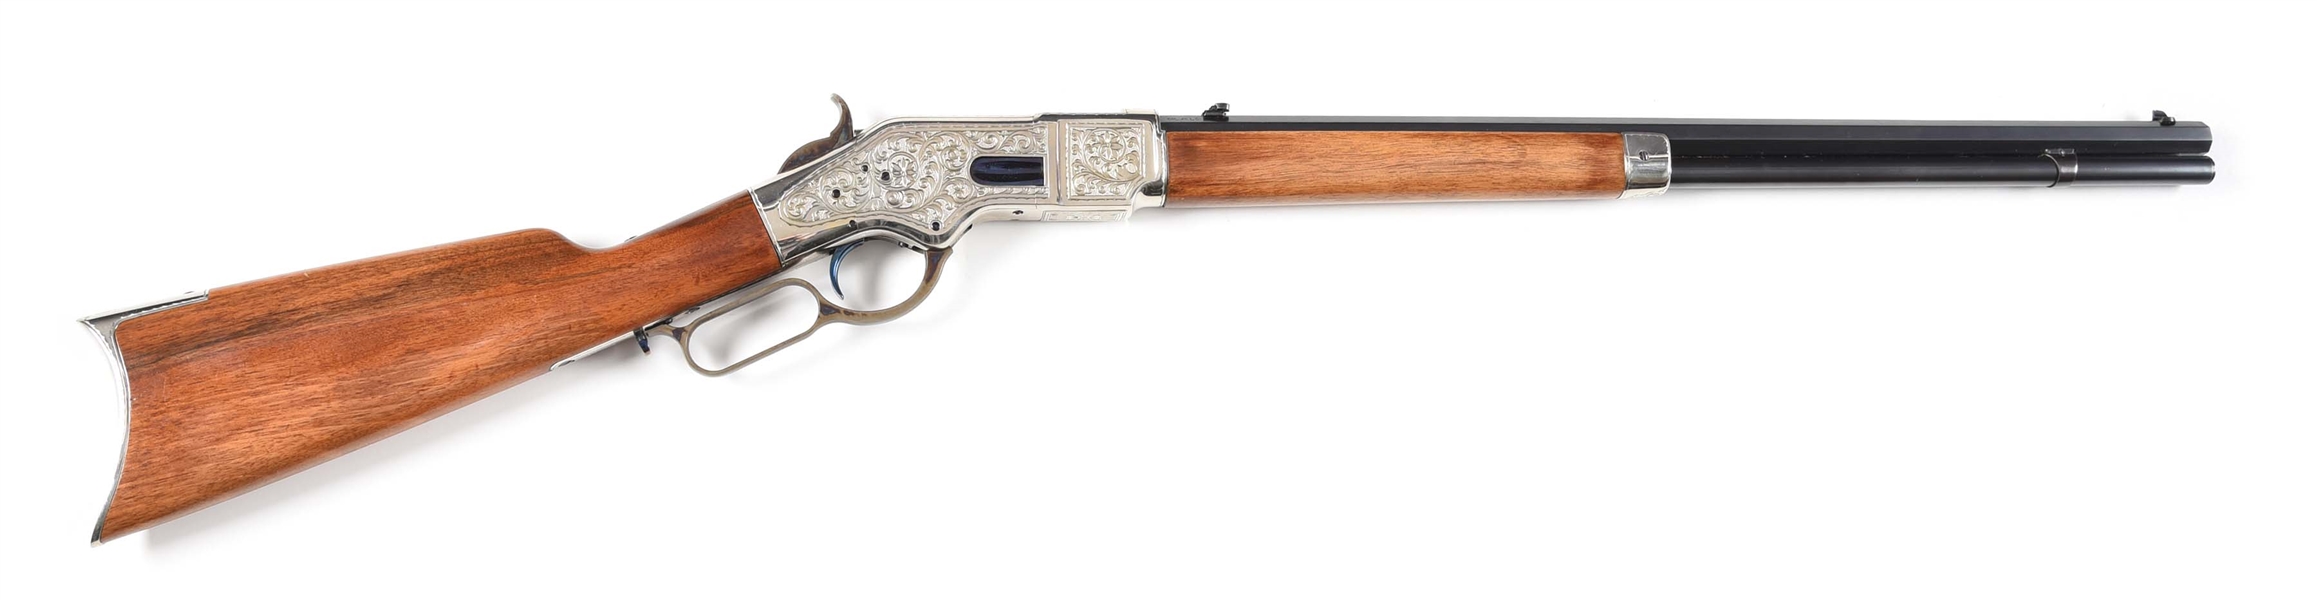 (M) EMF MODEL 66 SPORTING LEVER ACTION RIFLE.